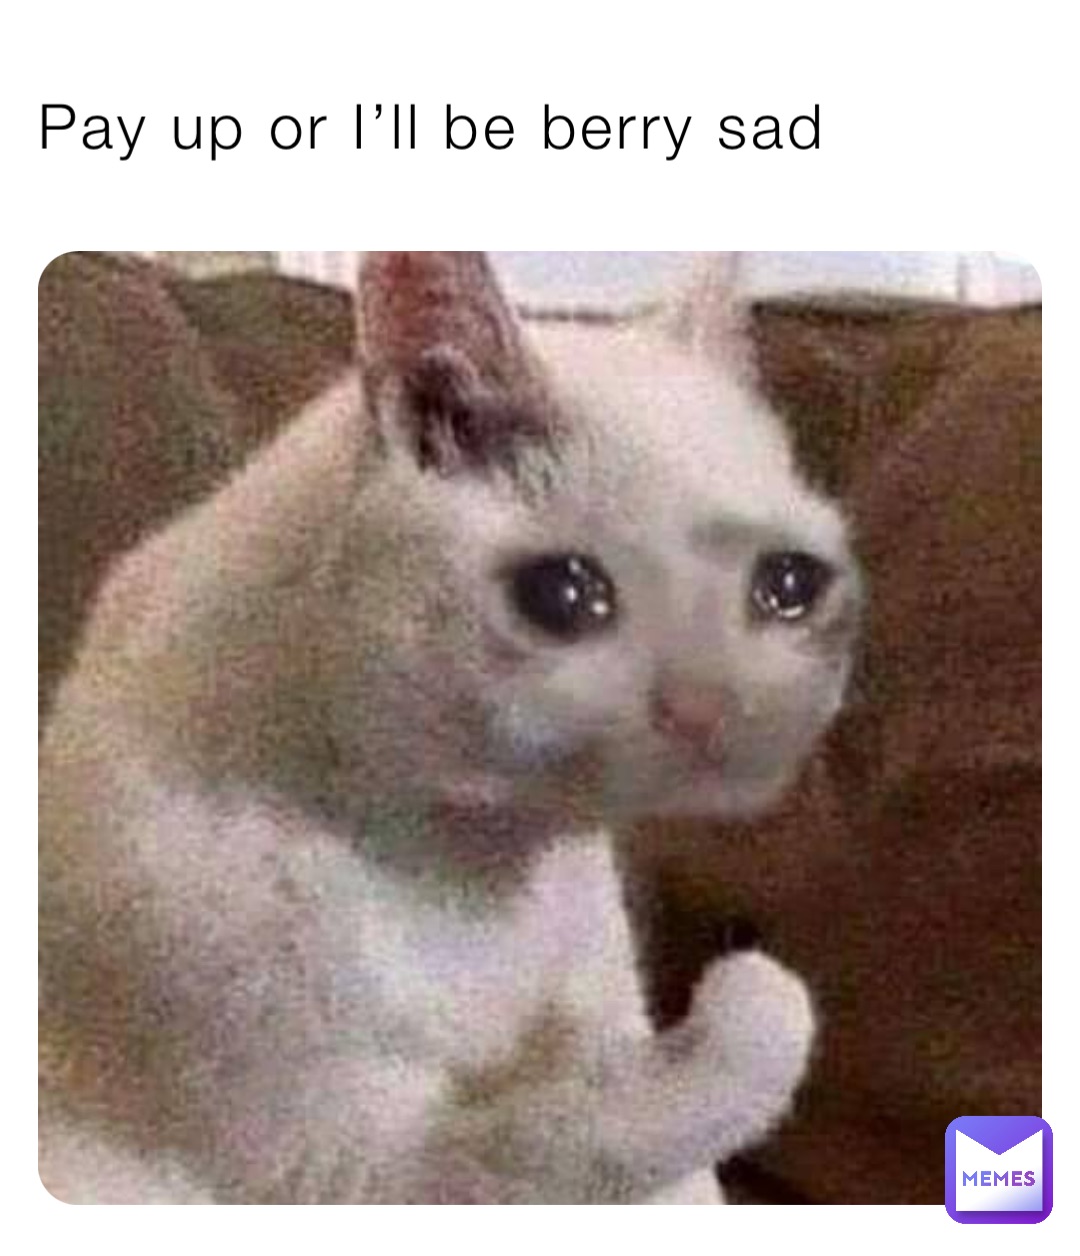 Pay up or I’ll be berry sad